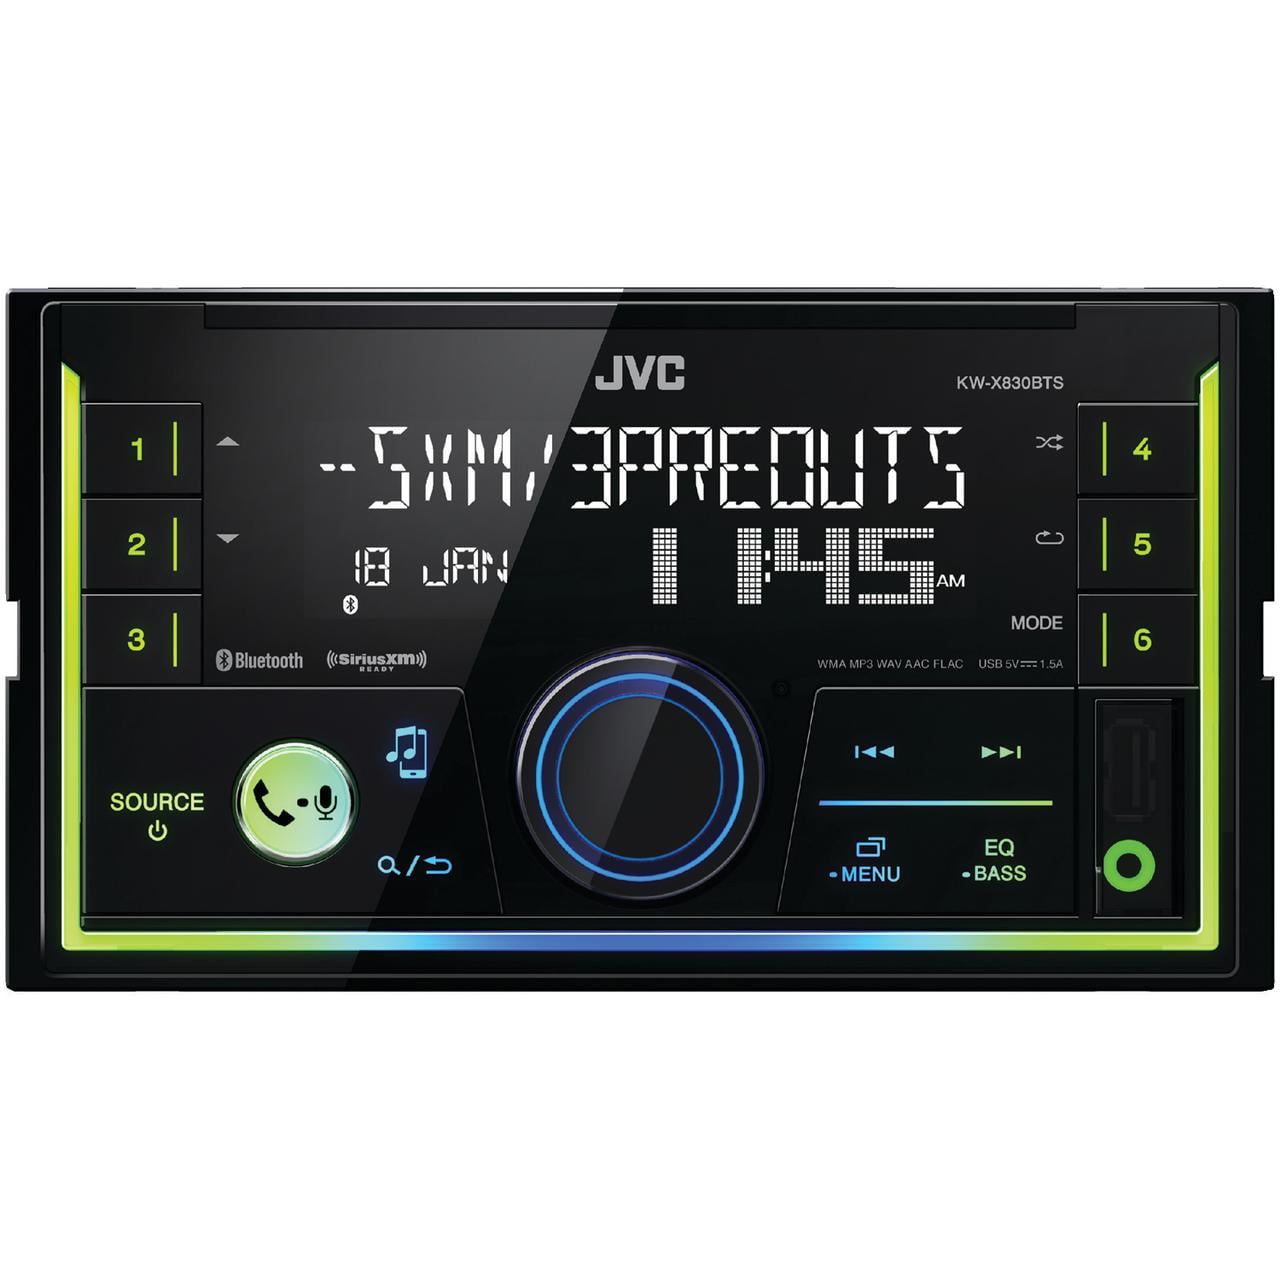 JVC KW-X830BT Mechless Double Din Bluetooth USB MP3 AUX iPhone Car Stereo Player 